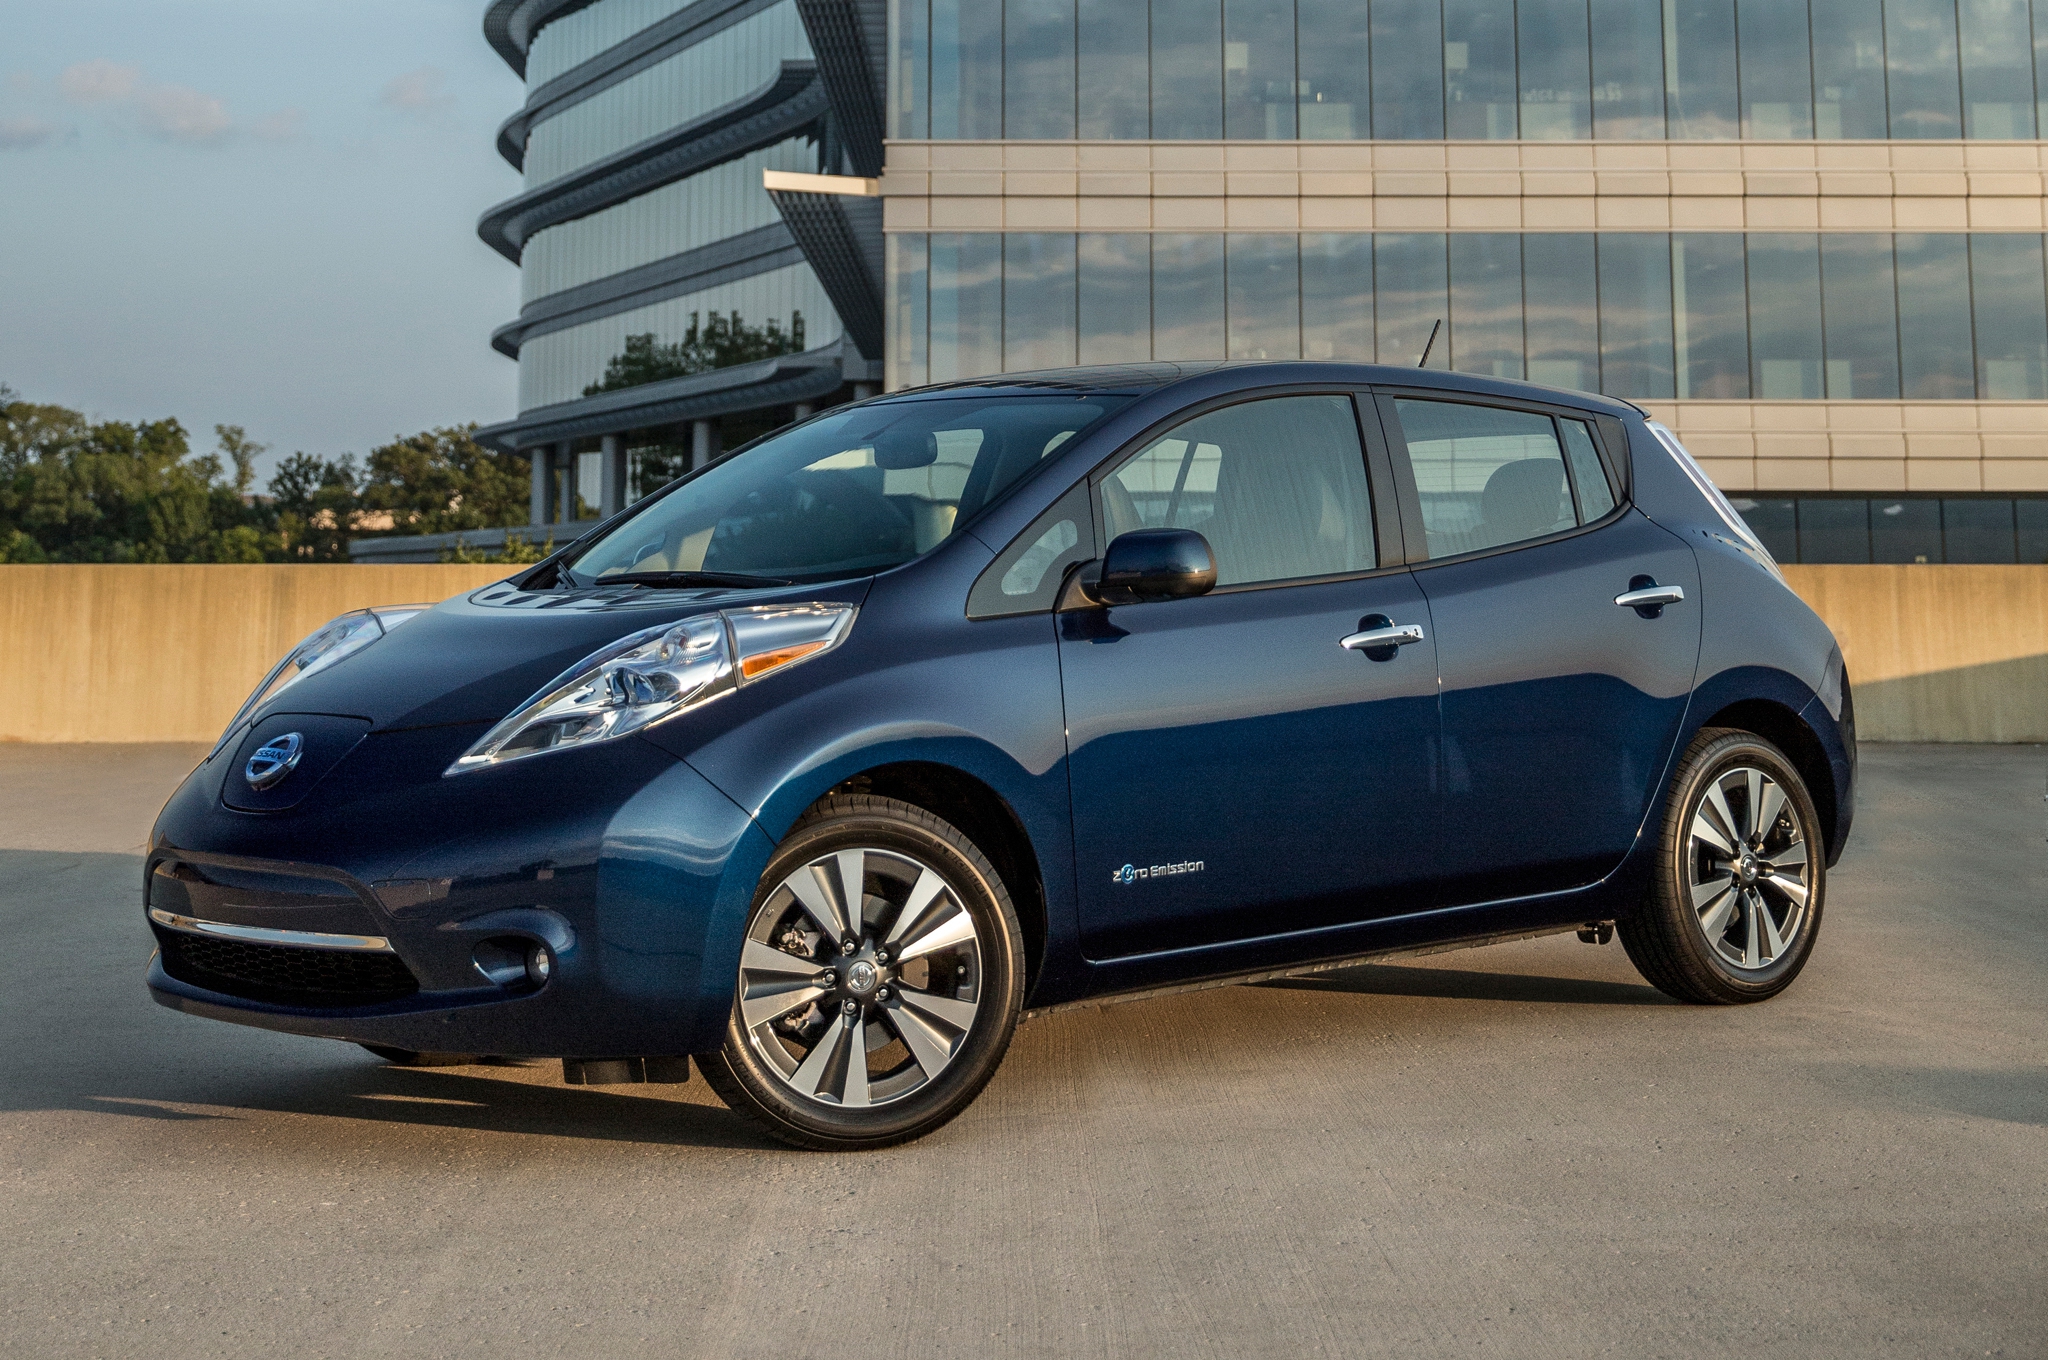 Nissan Leaf Wallpaper Image Photos Pictures Background